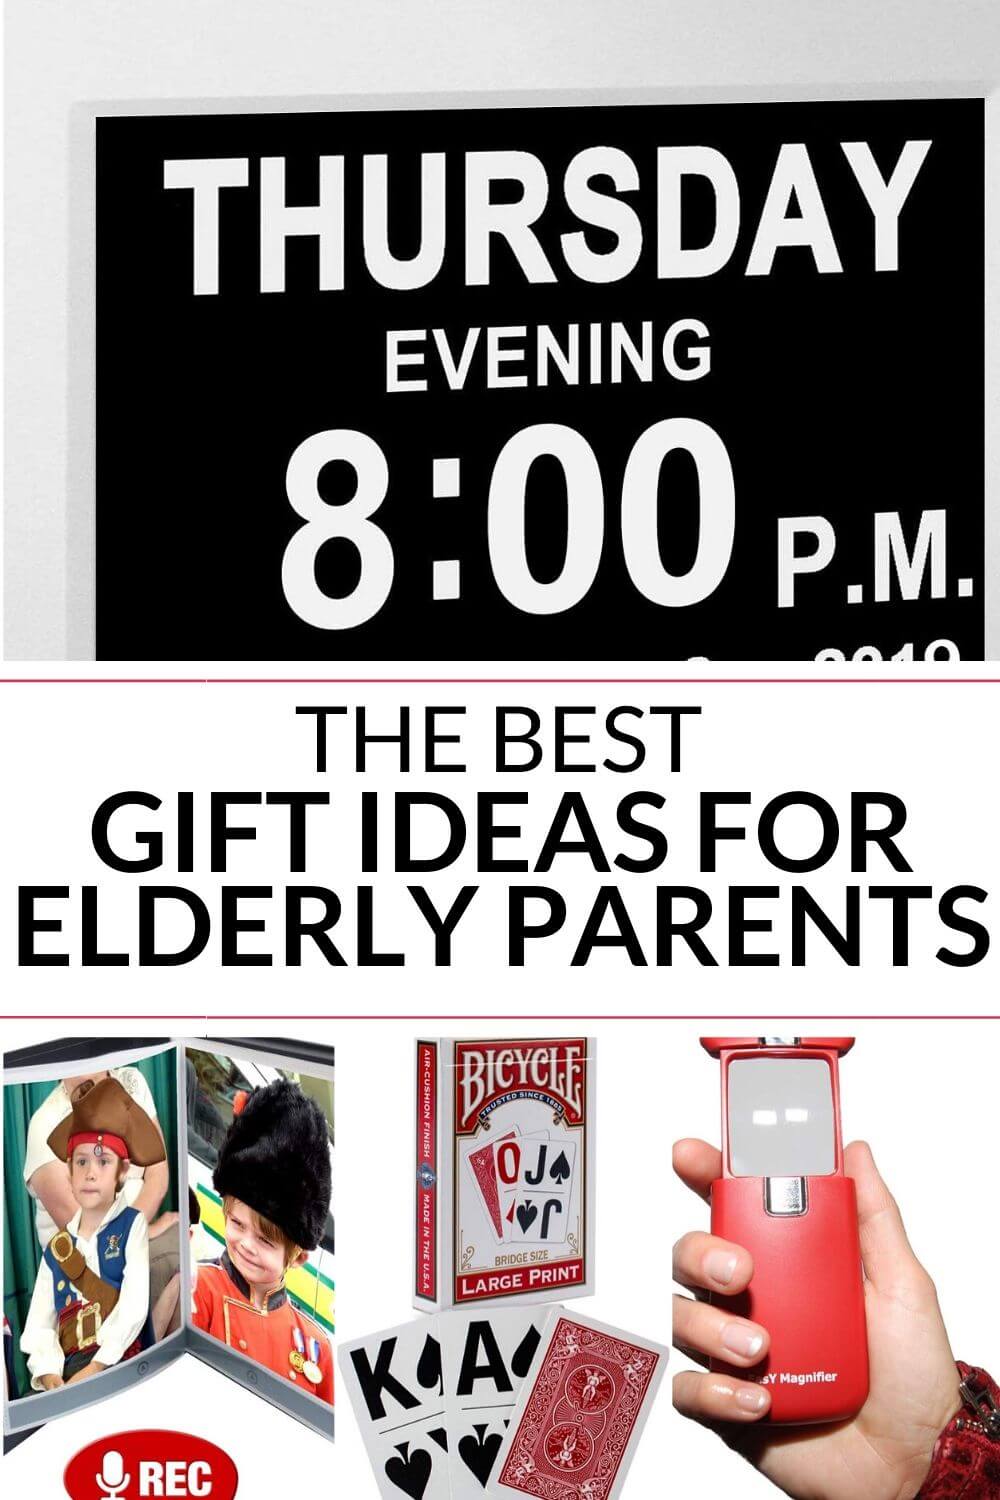 collection of gifts for elderly parents